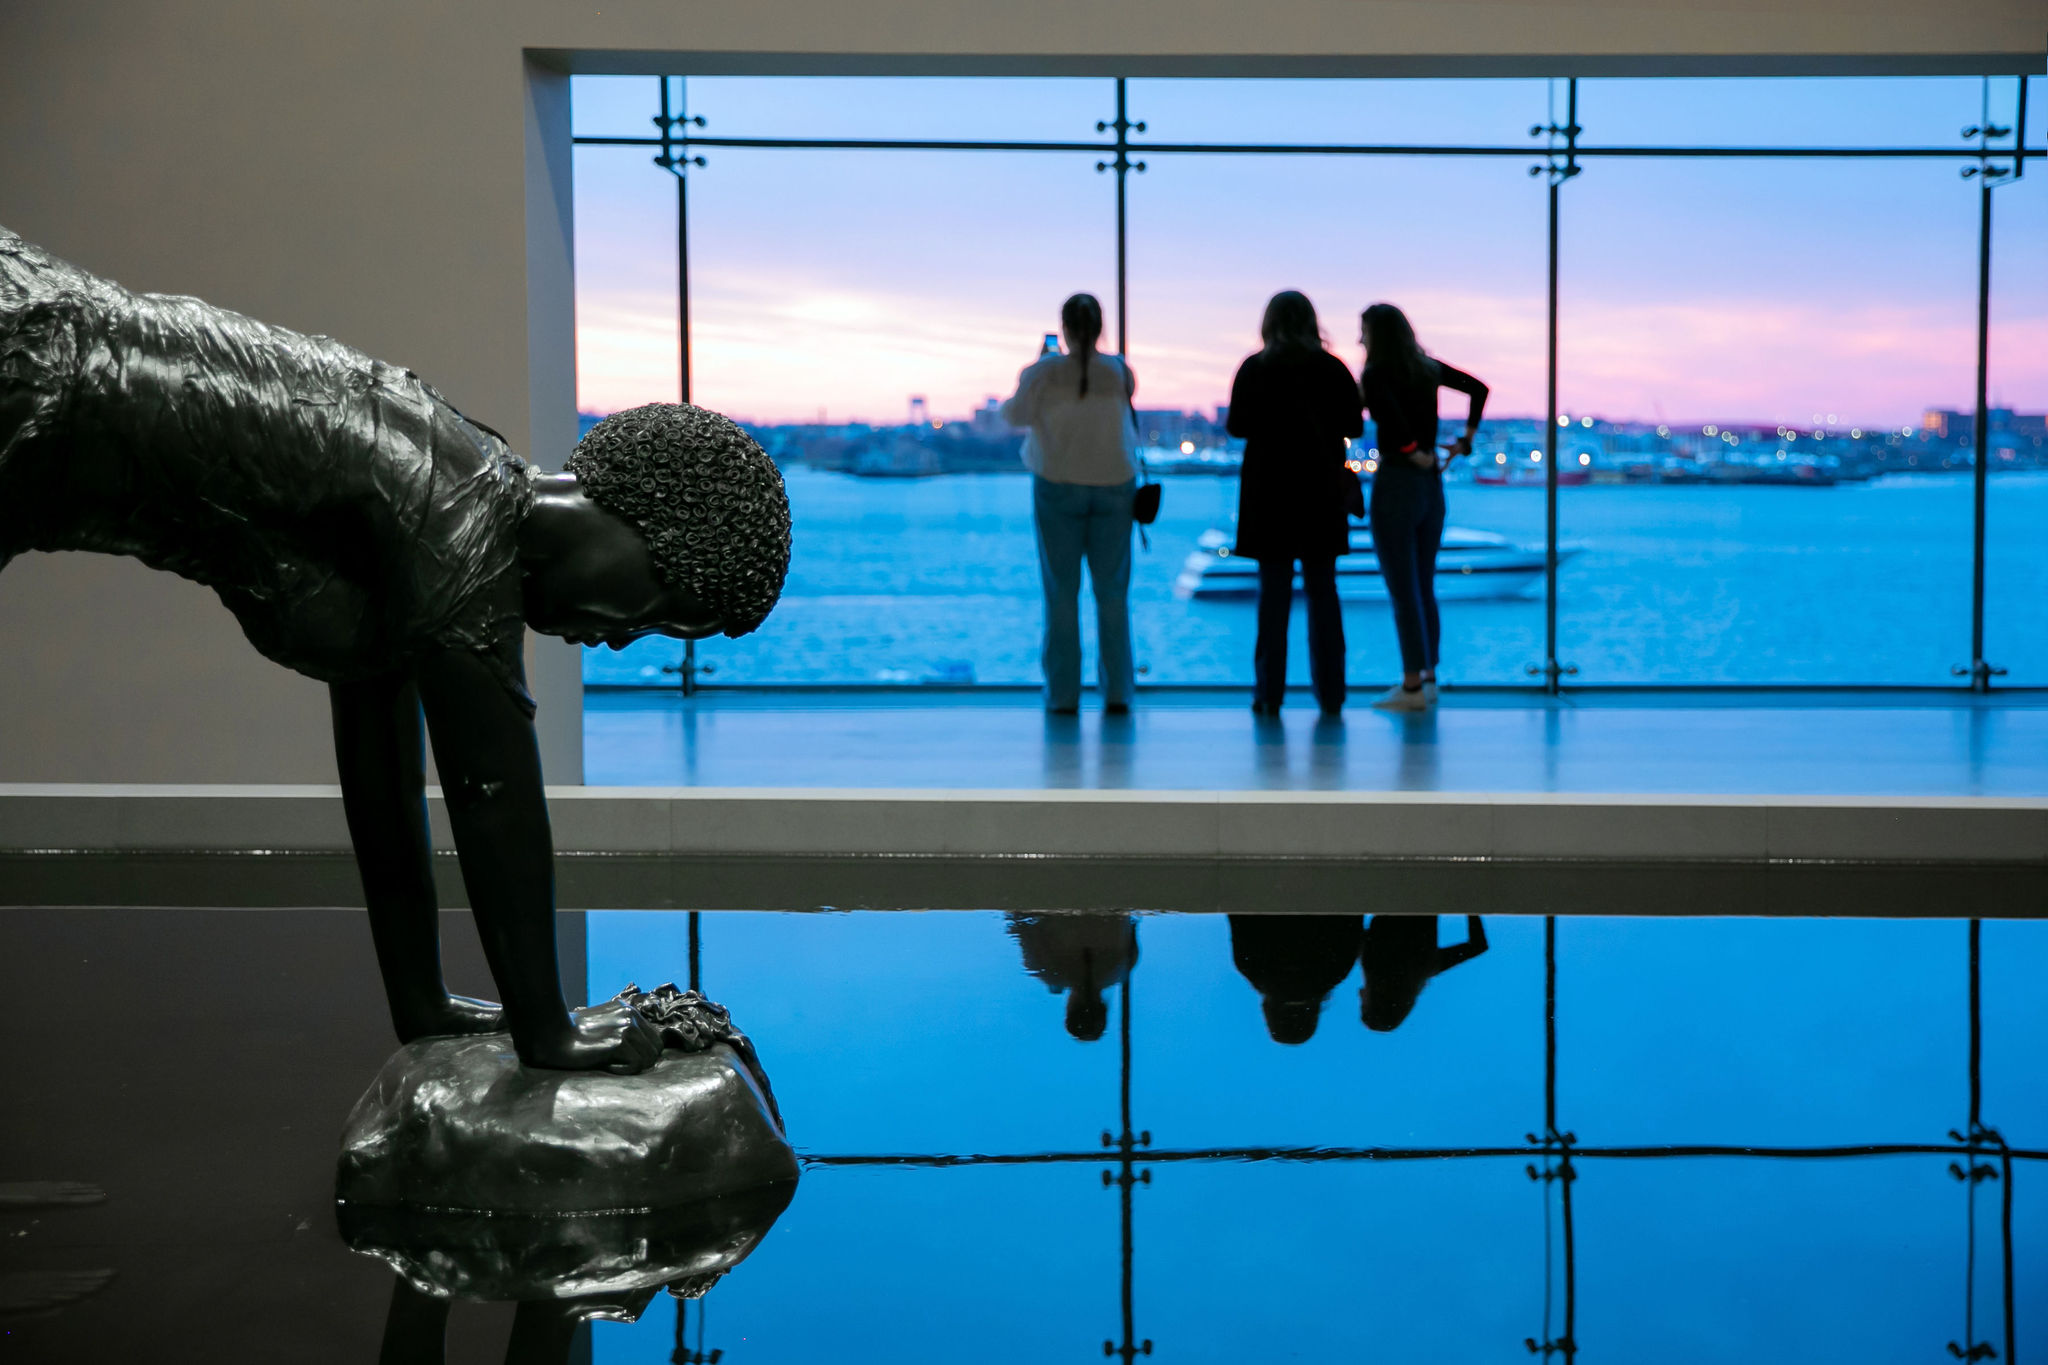 Bronze sculpture of woman bending down in pool of water with view of harbor at sunset in background